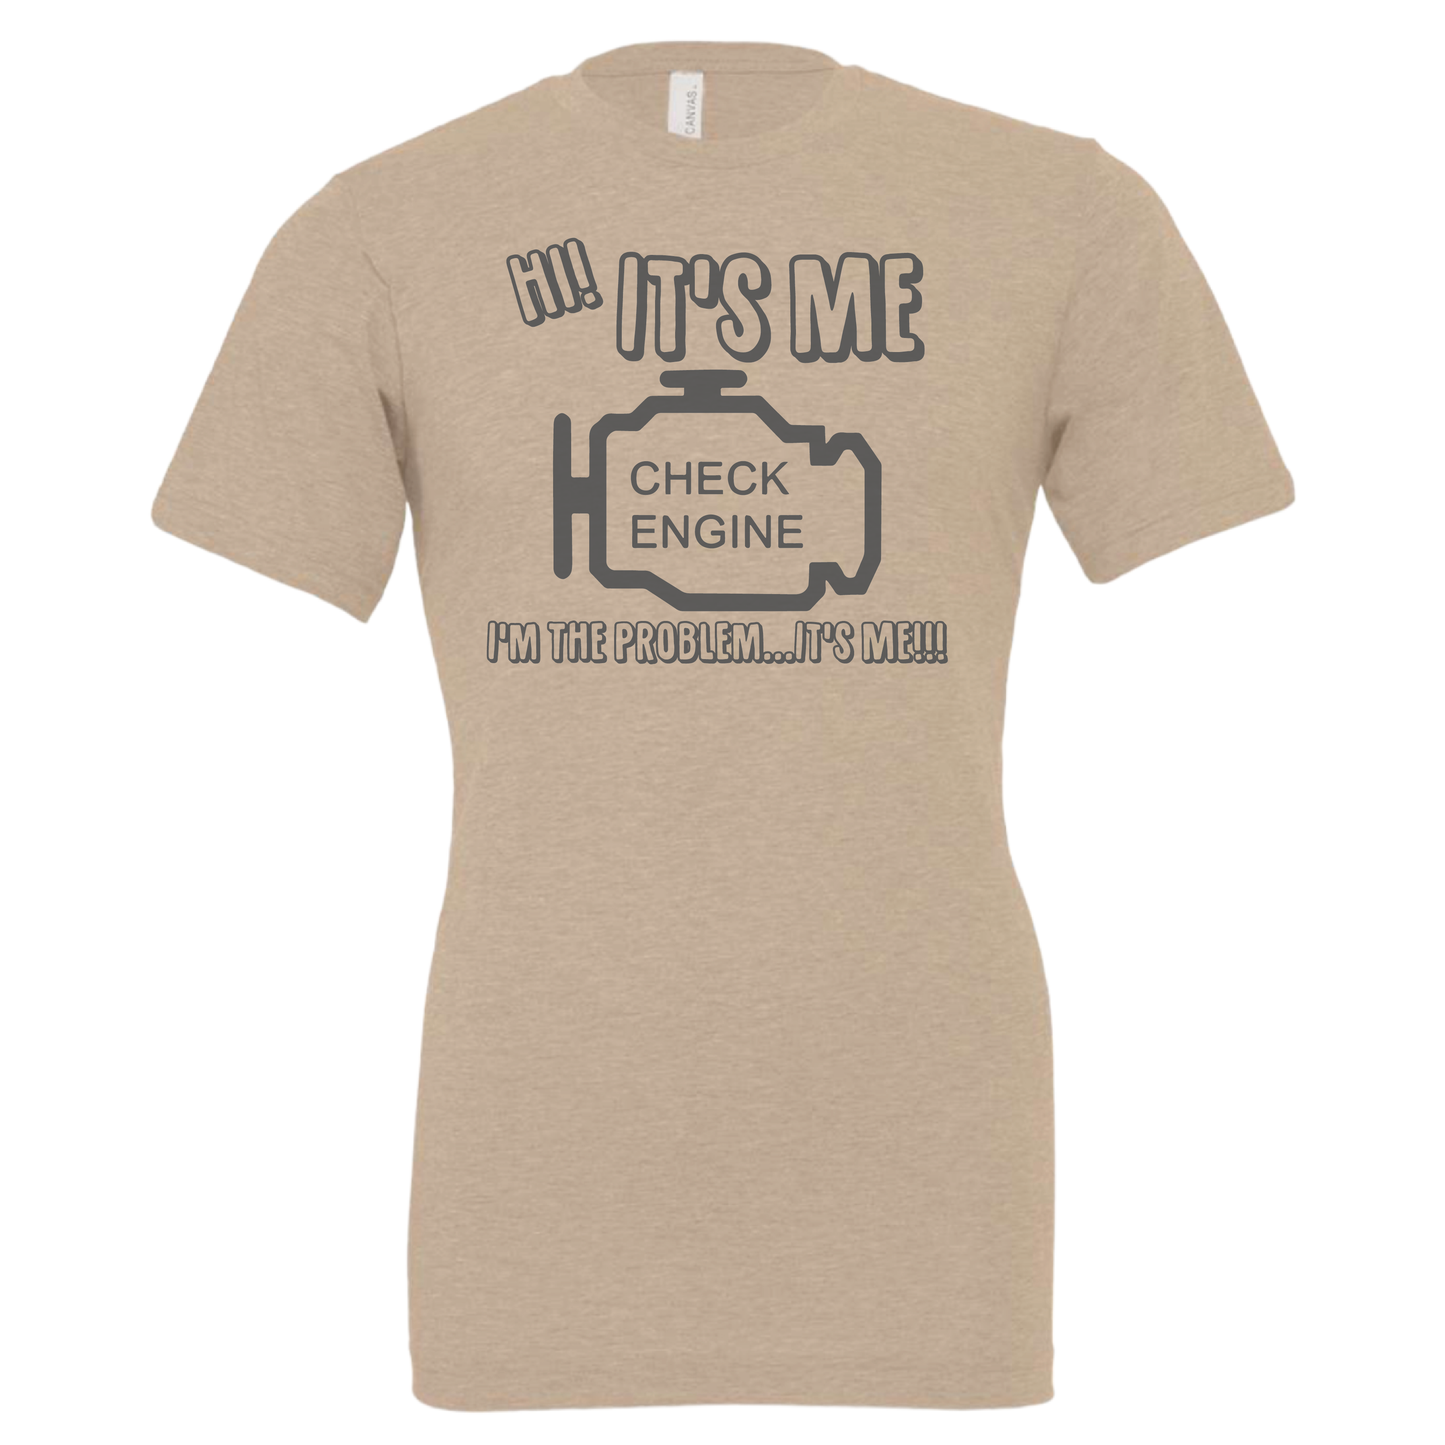 Check Engine - Available in Multiple Colors & Styles